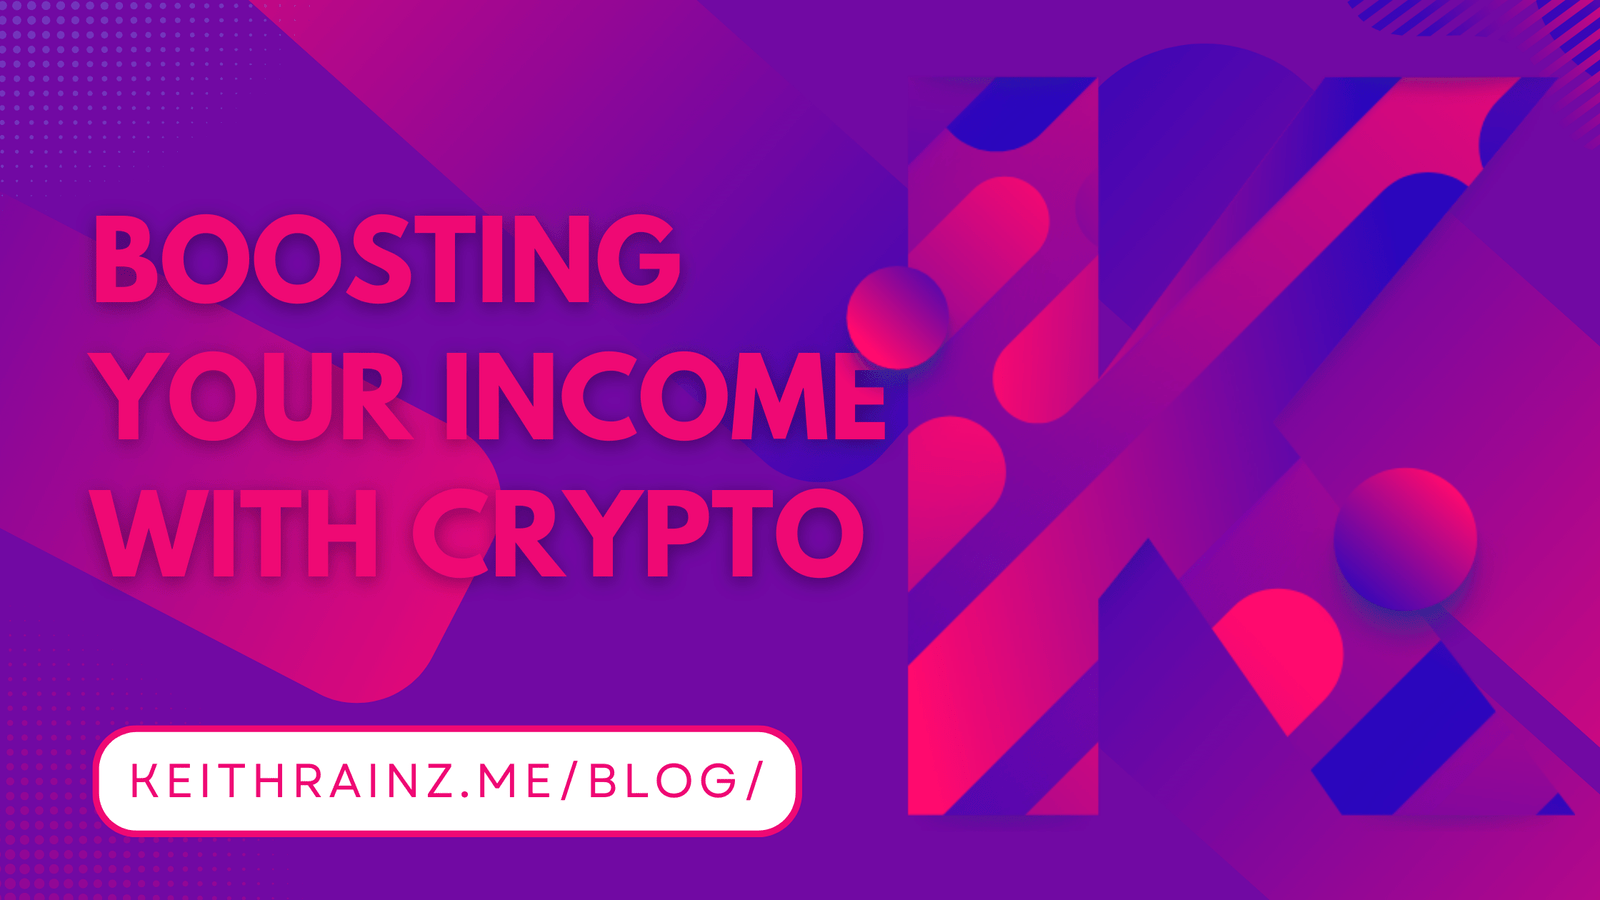 5 ways on how crypto can boost your income